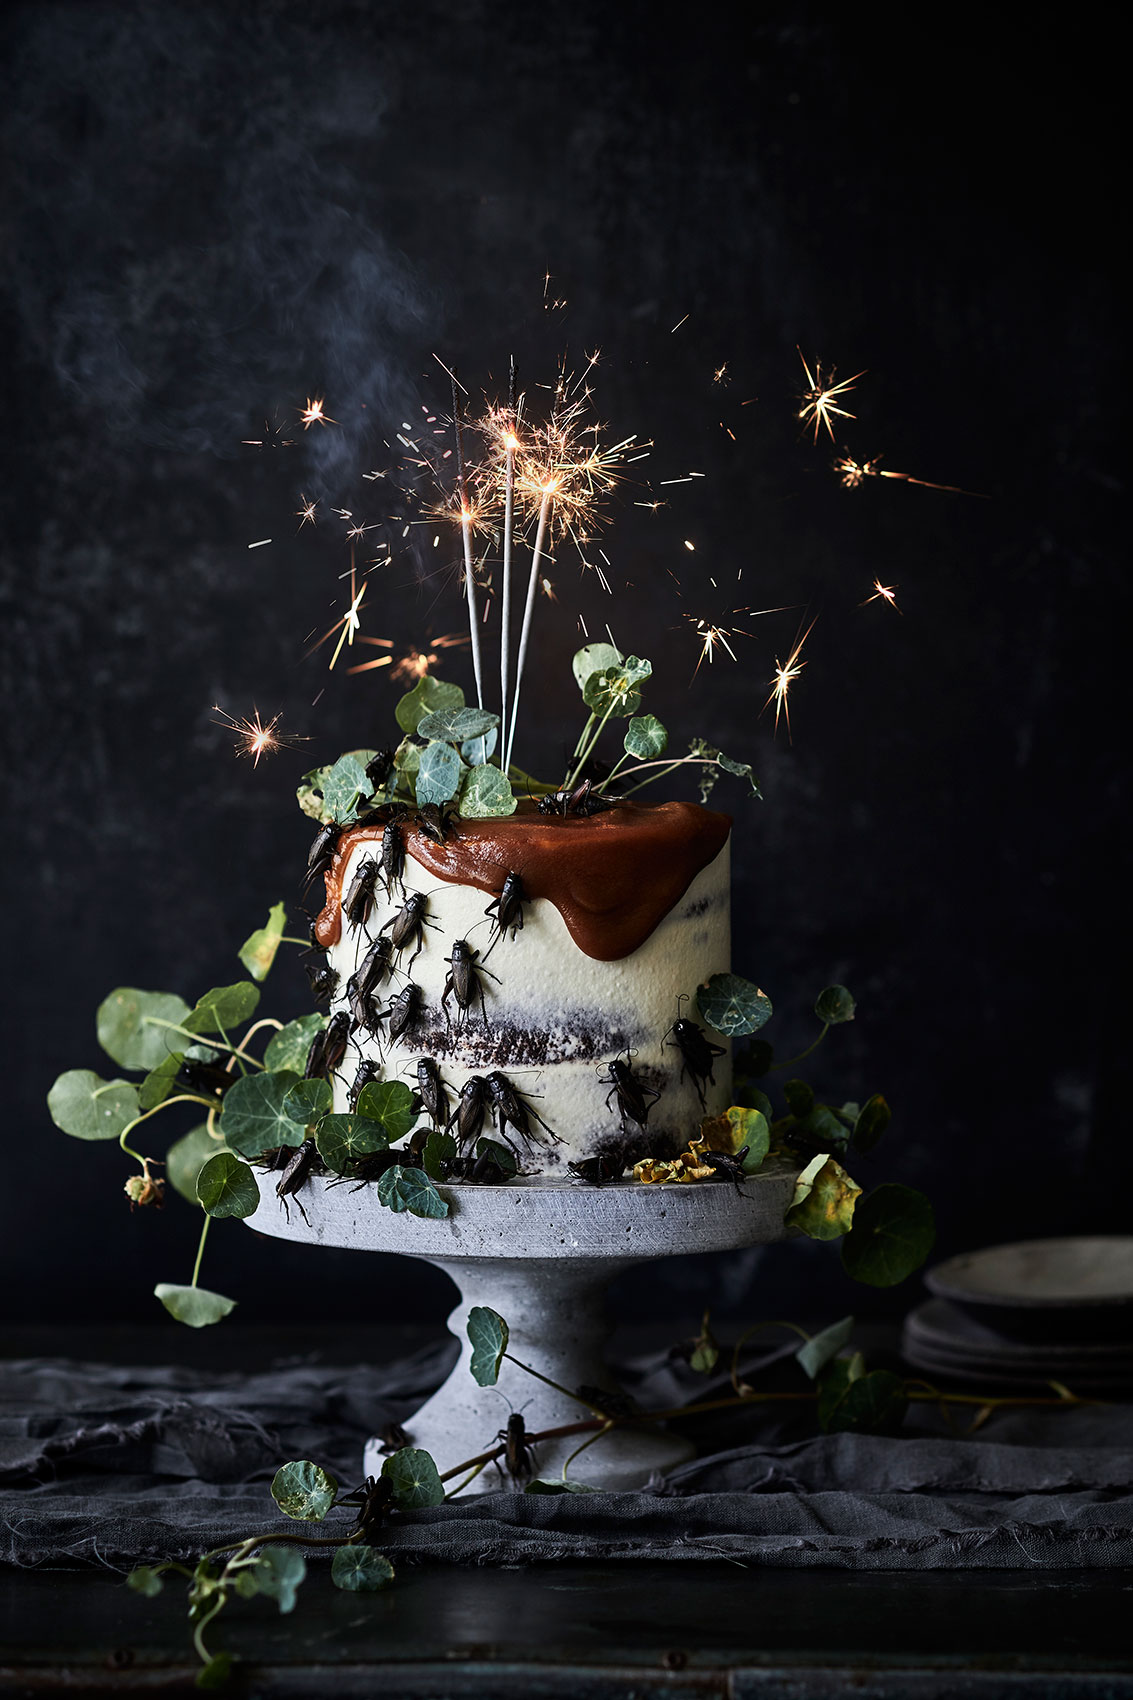 Cricket Celebration Cake with Sparklers • The Bug Project • Personal Work &  Food Photography